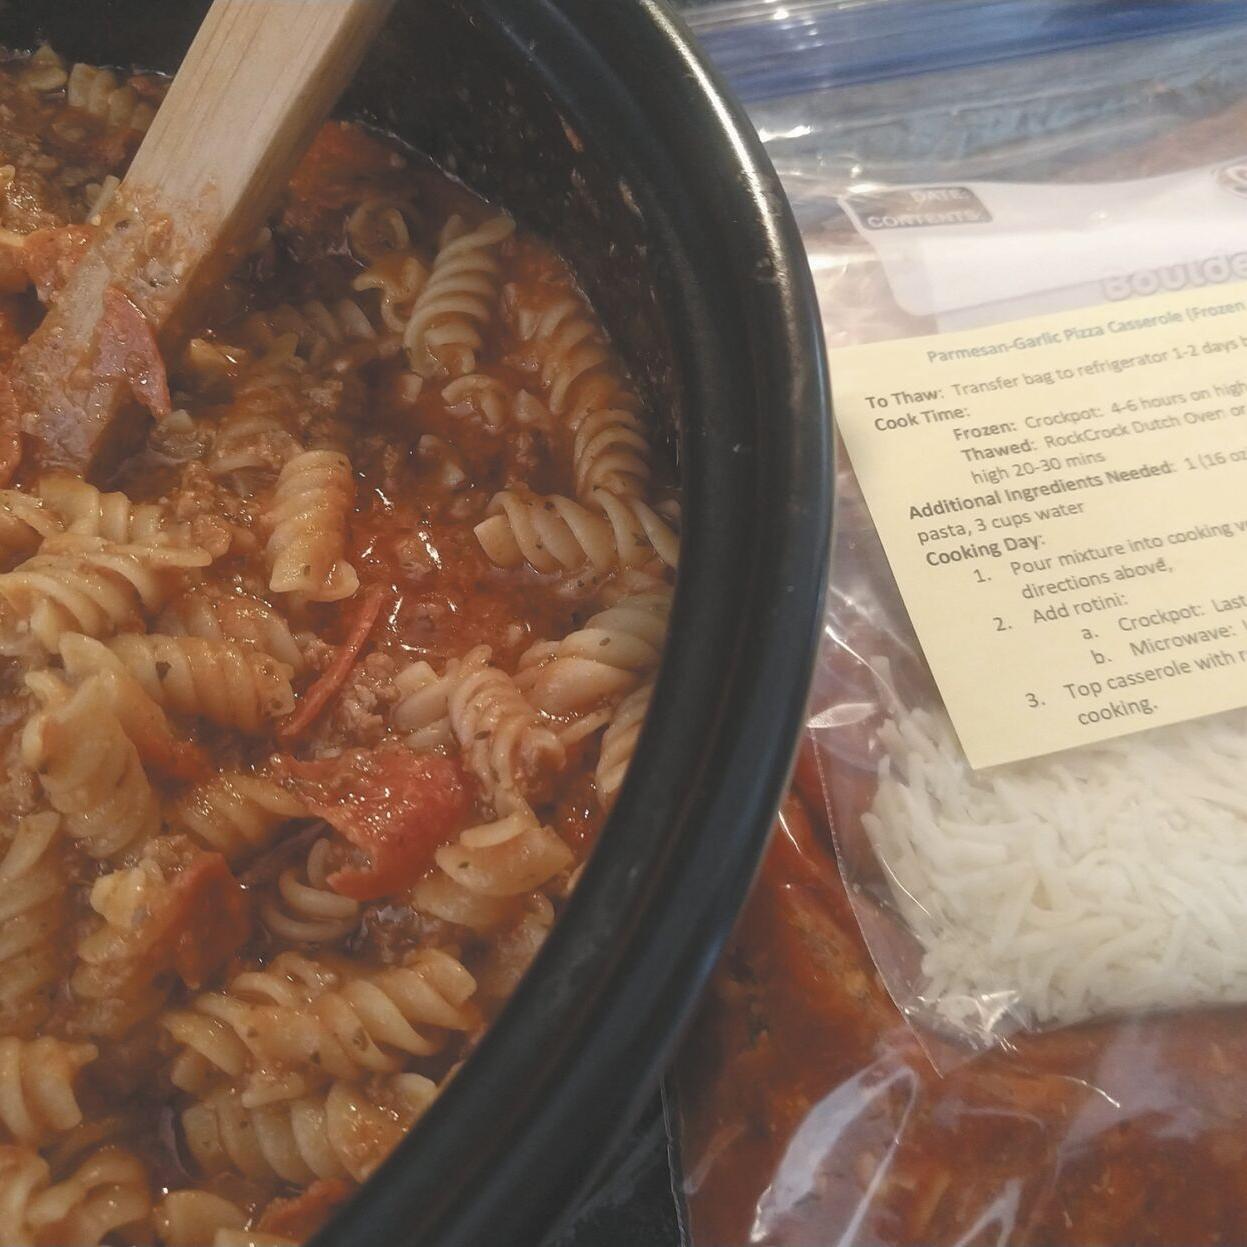 Meal can be frozen, cooked in crockpot or microwave  Taste